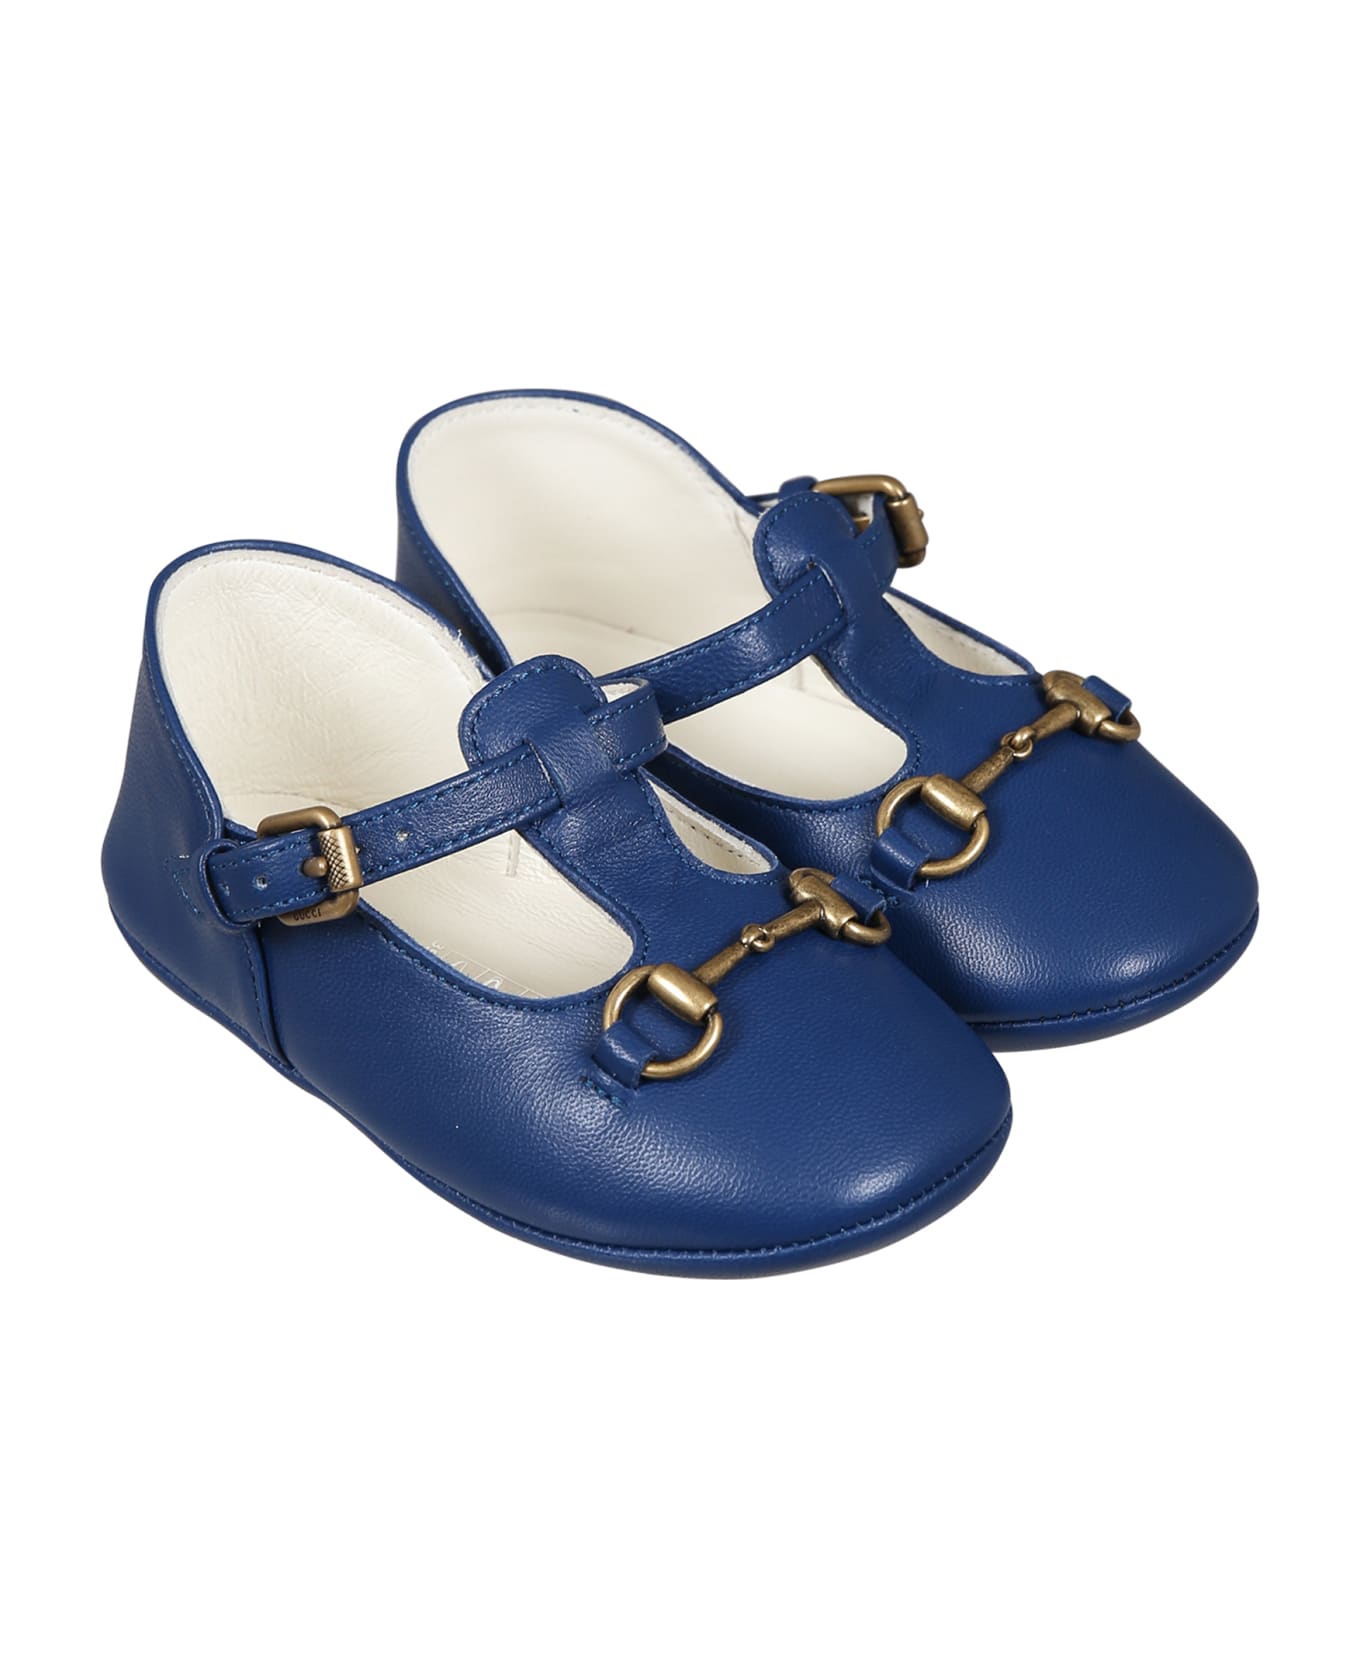 Gucci Blue Ballet Flats For Babykids With Clamp - Blue シューズ